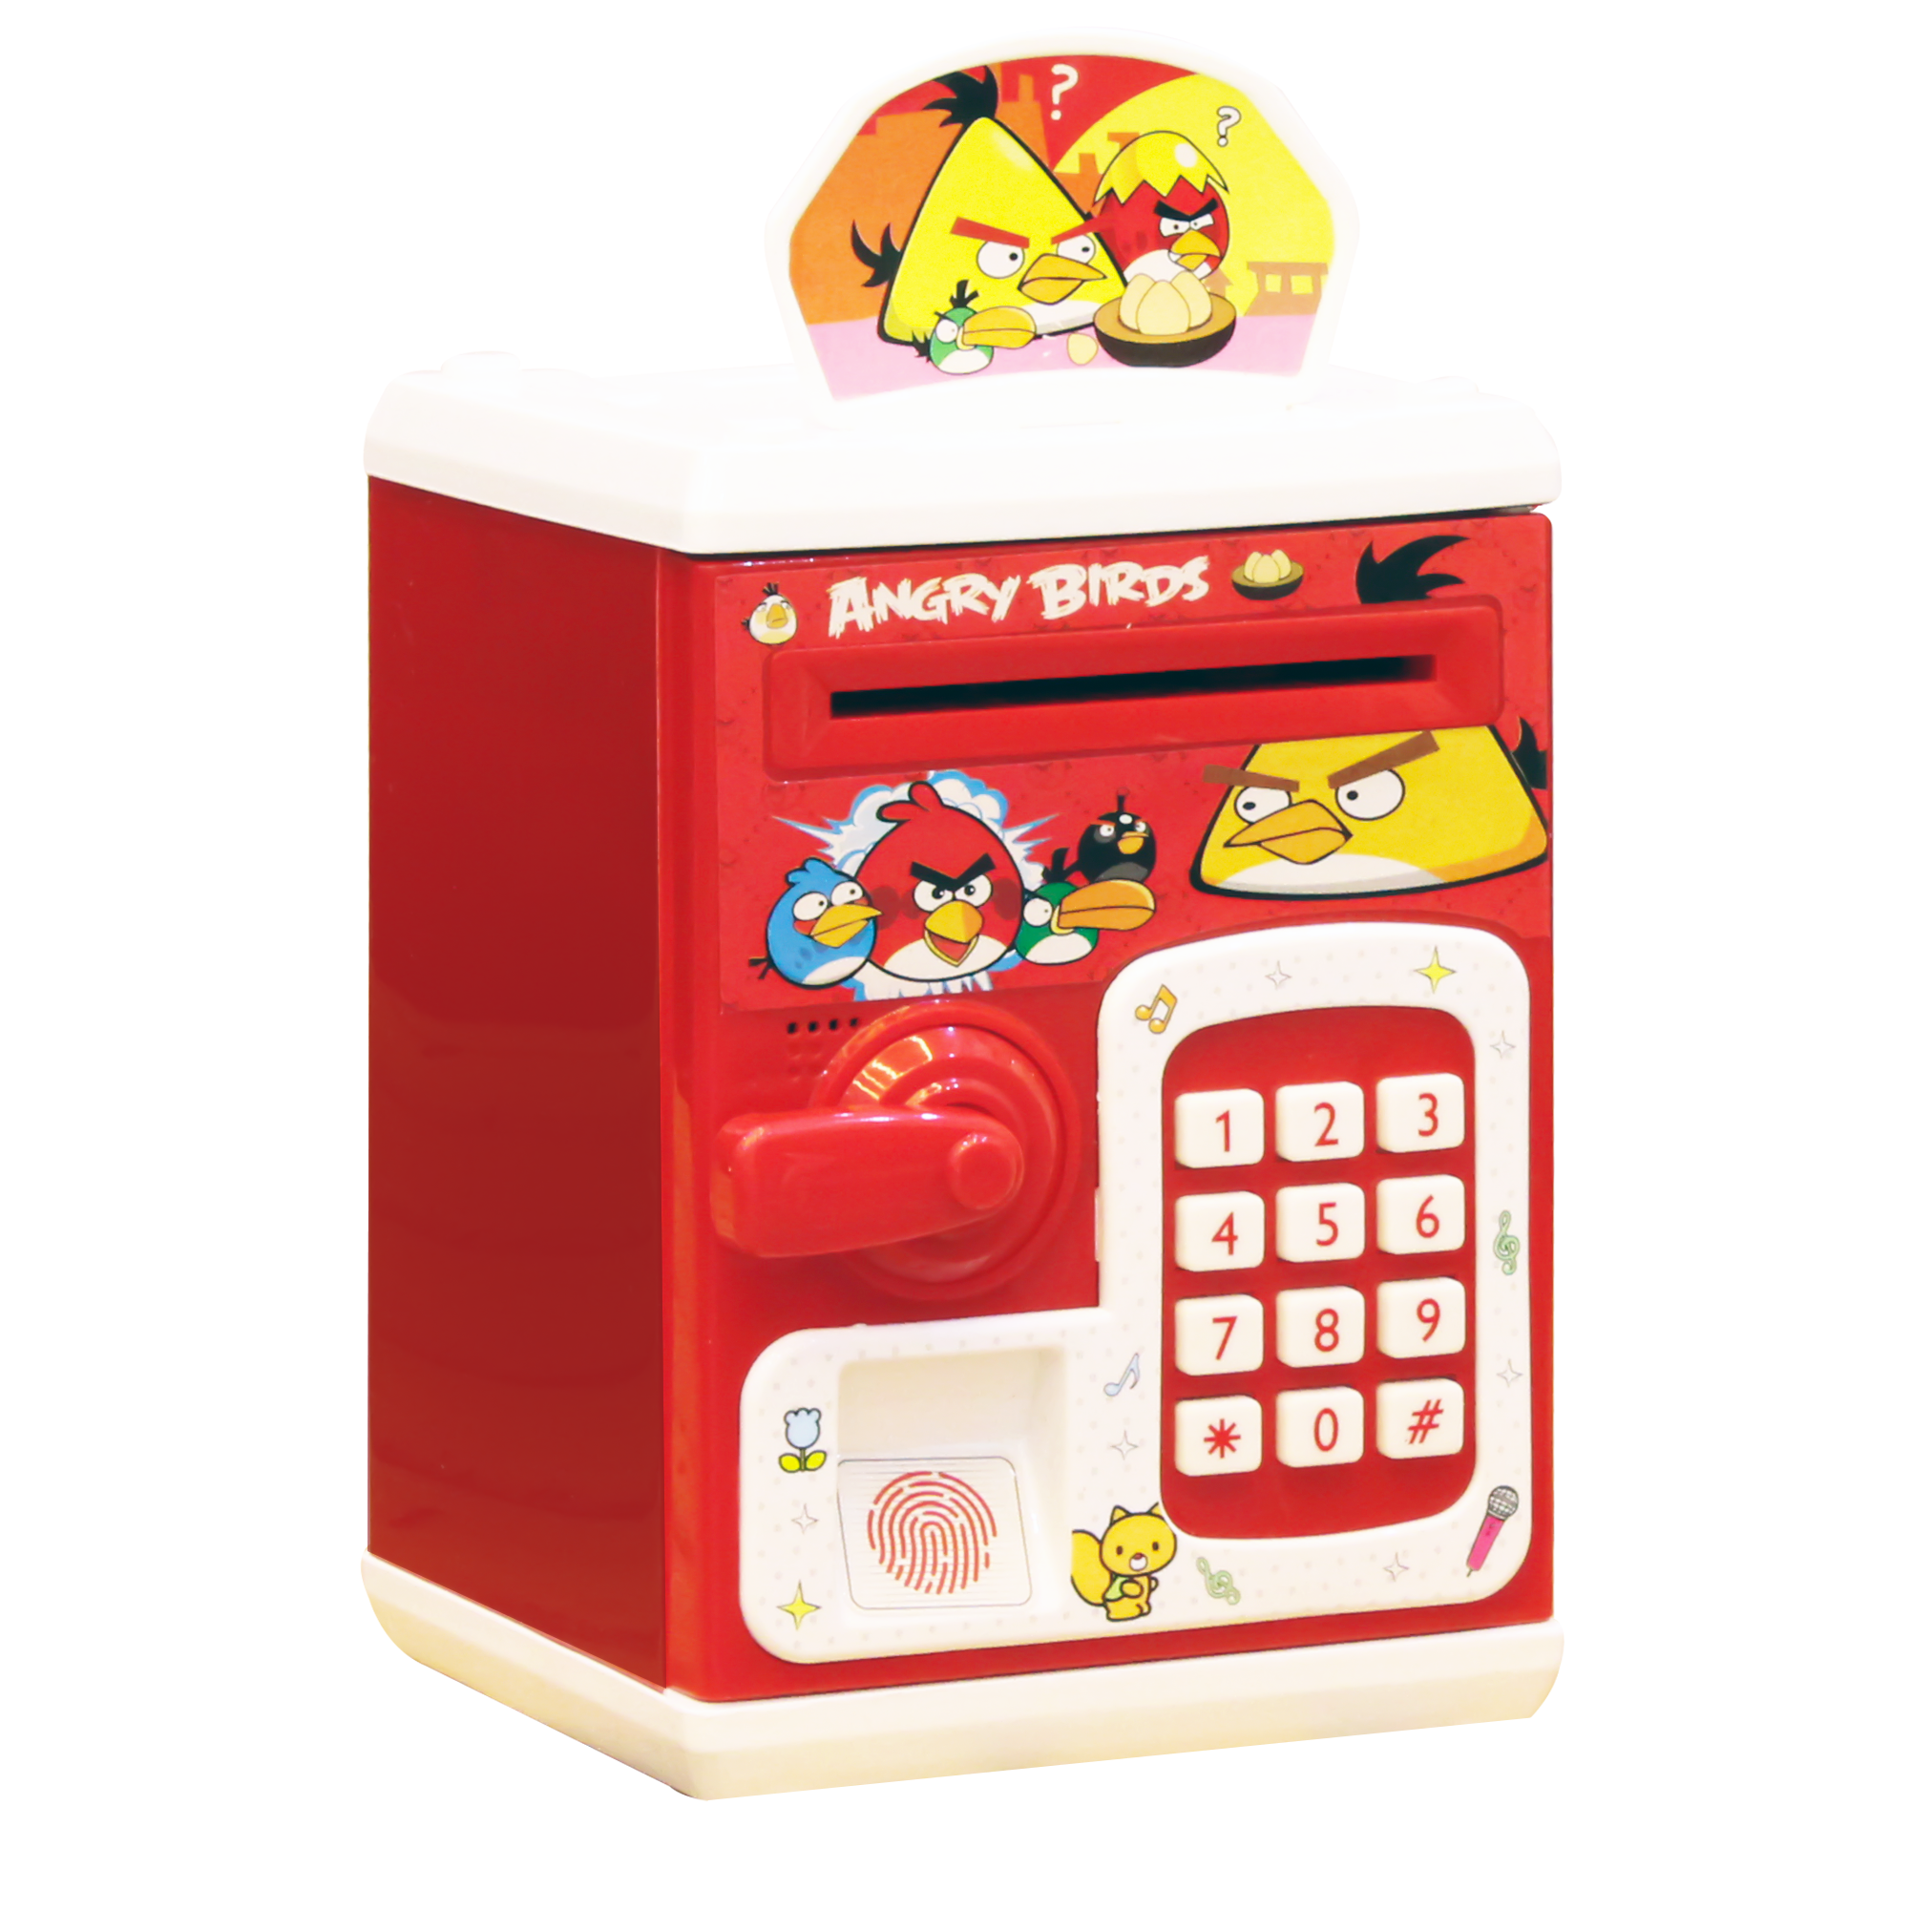 Angry birds ATM Saving Box with Finger Print and Password Unlock For Kids